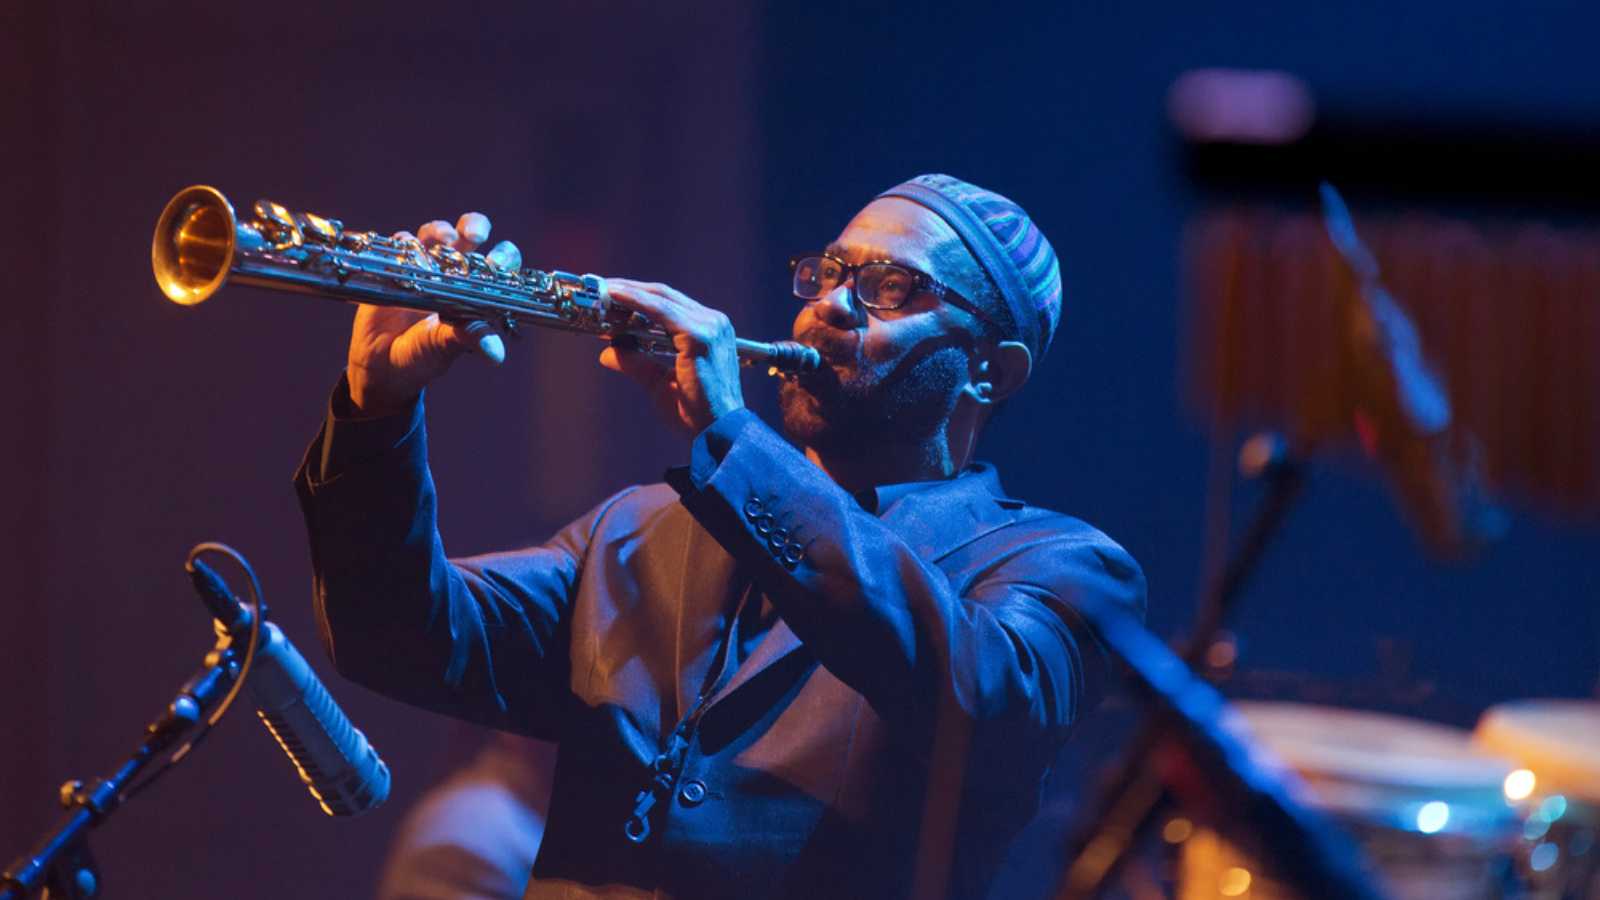 ESPOO, FINLAND-APRIL 24 2014:American Kenny Garrett performs live on 28th April Jazz.He is a Grammy Award-winning jazz saxophonist and was a member of Duke Ellington Orchestra & Miles Davis's band